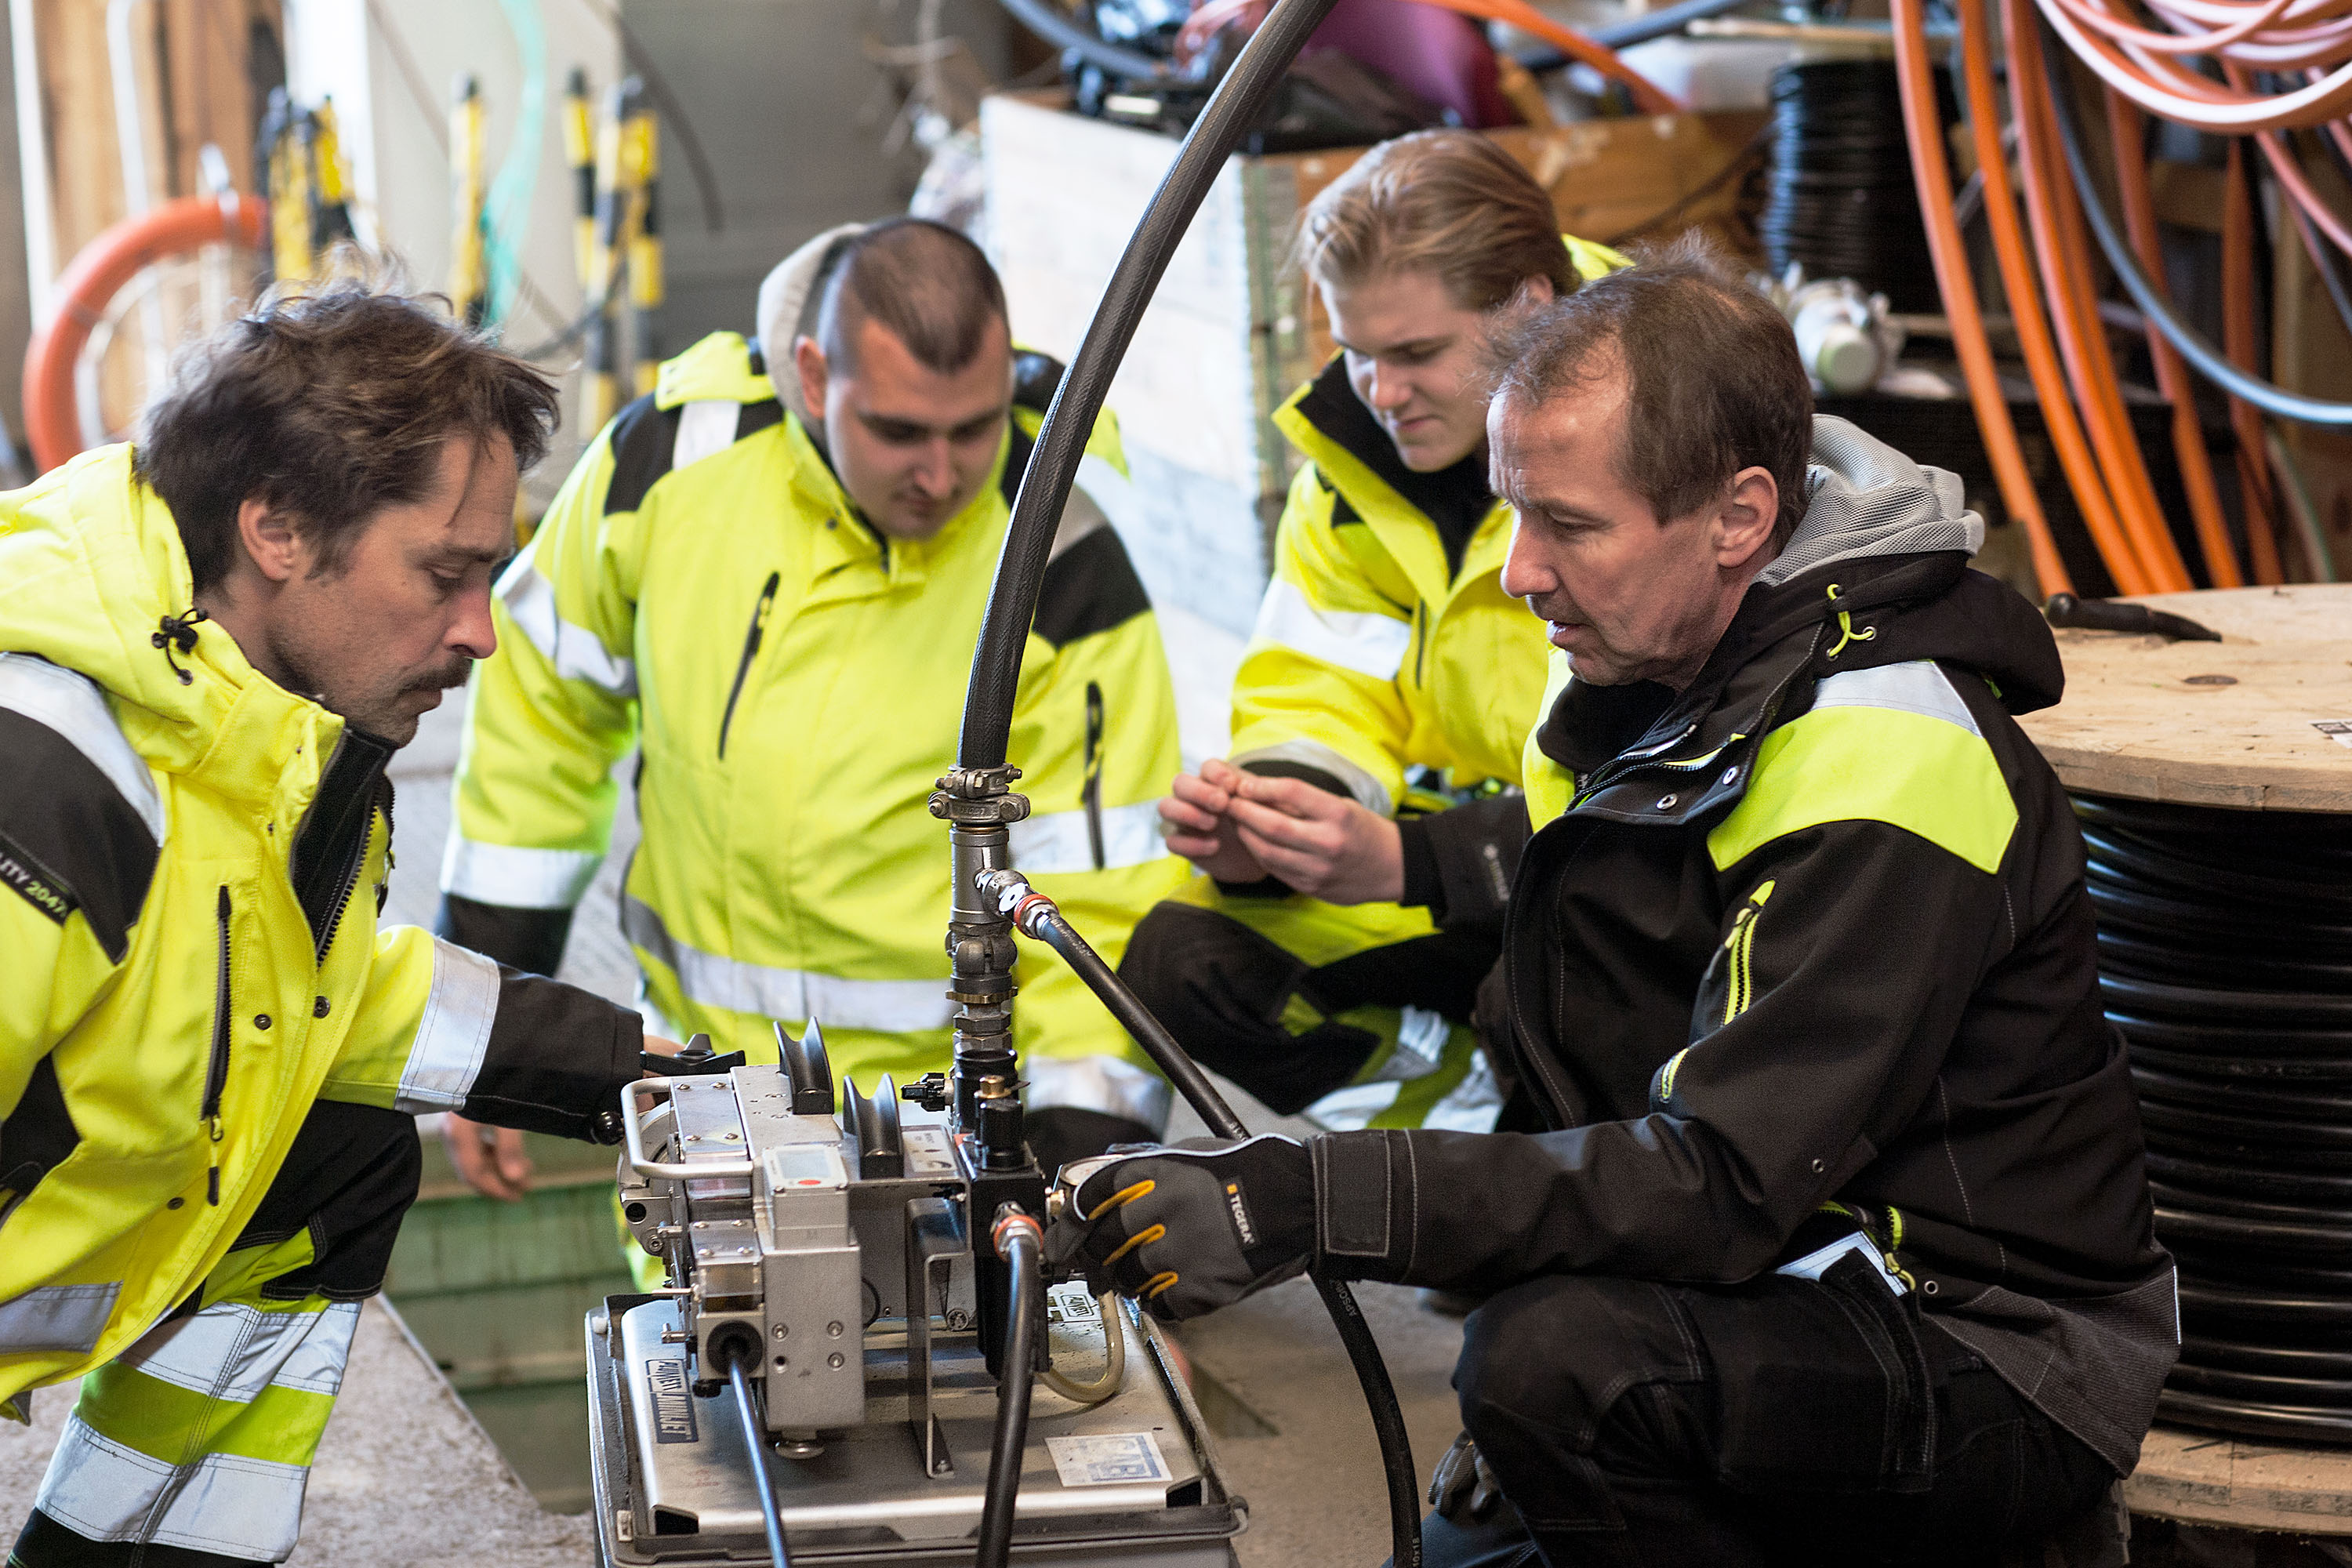 A group of four people in safety jackets, working on a mechanical device indoors. They seem to be collaborating on a repair or training session.